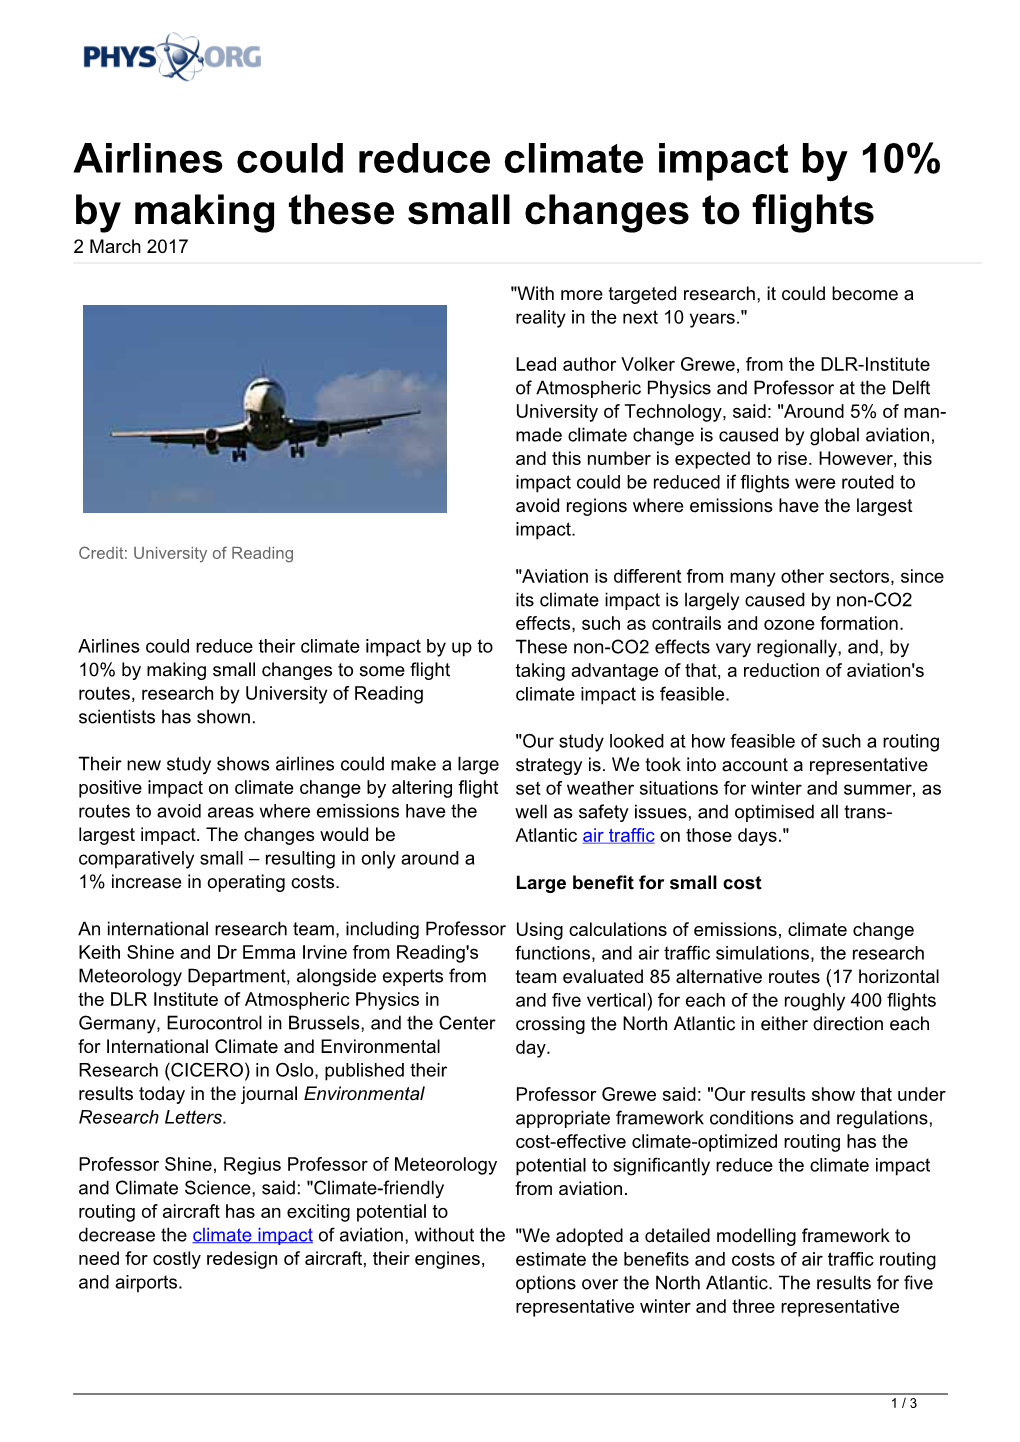 Airlines Could Reduce Climate Impact by 10% by Making These Small Changes to Flights 2 March 2017